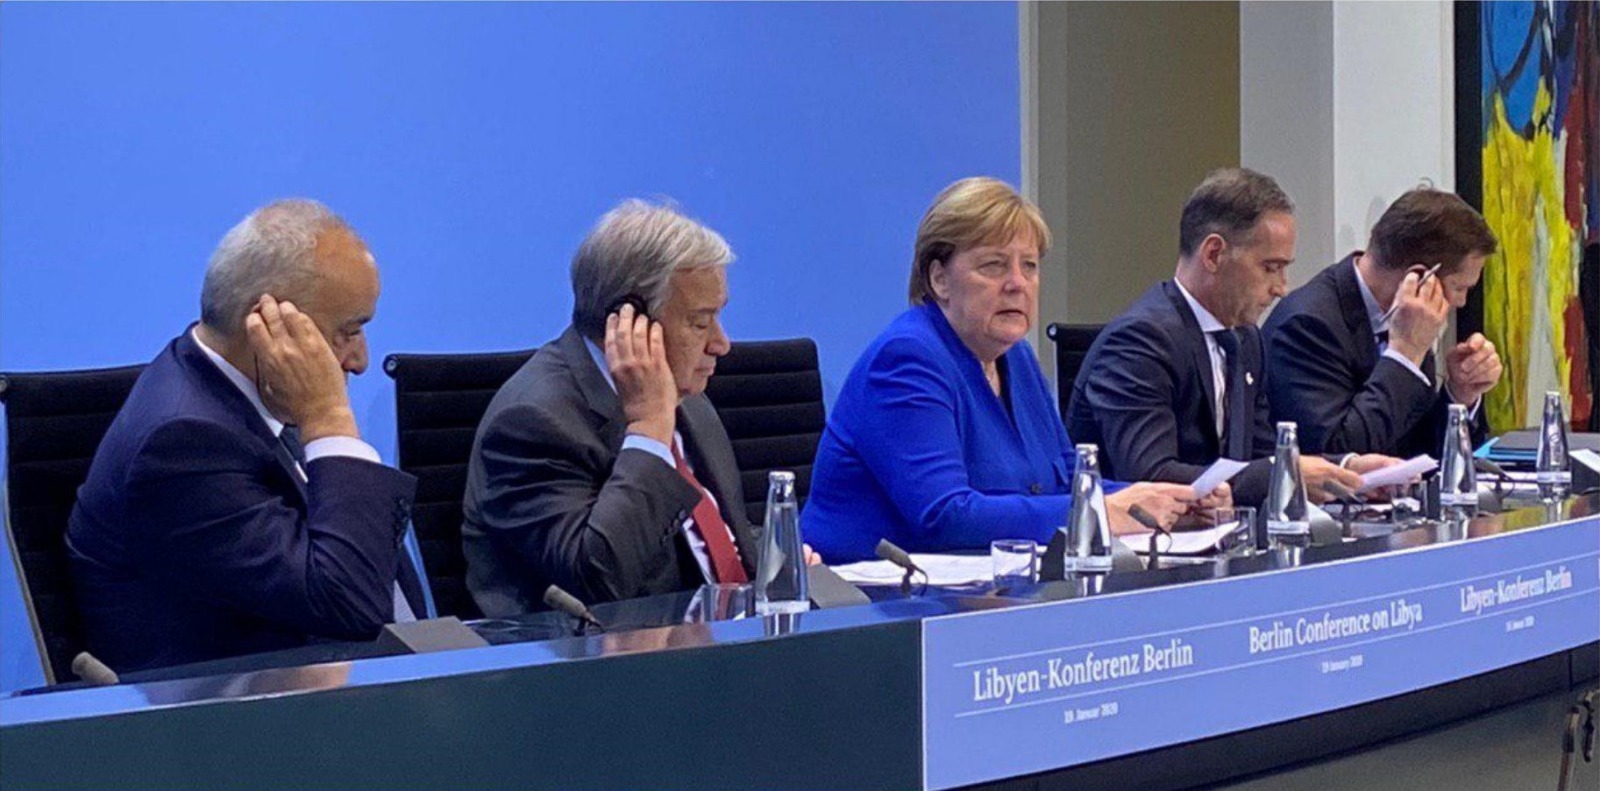 Foreign leaders seek a way forward for the Libyan conflict in Berlin